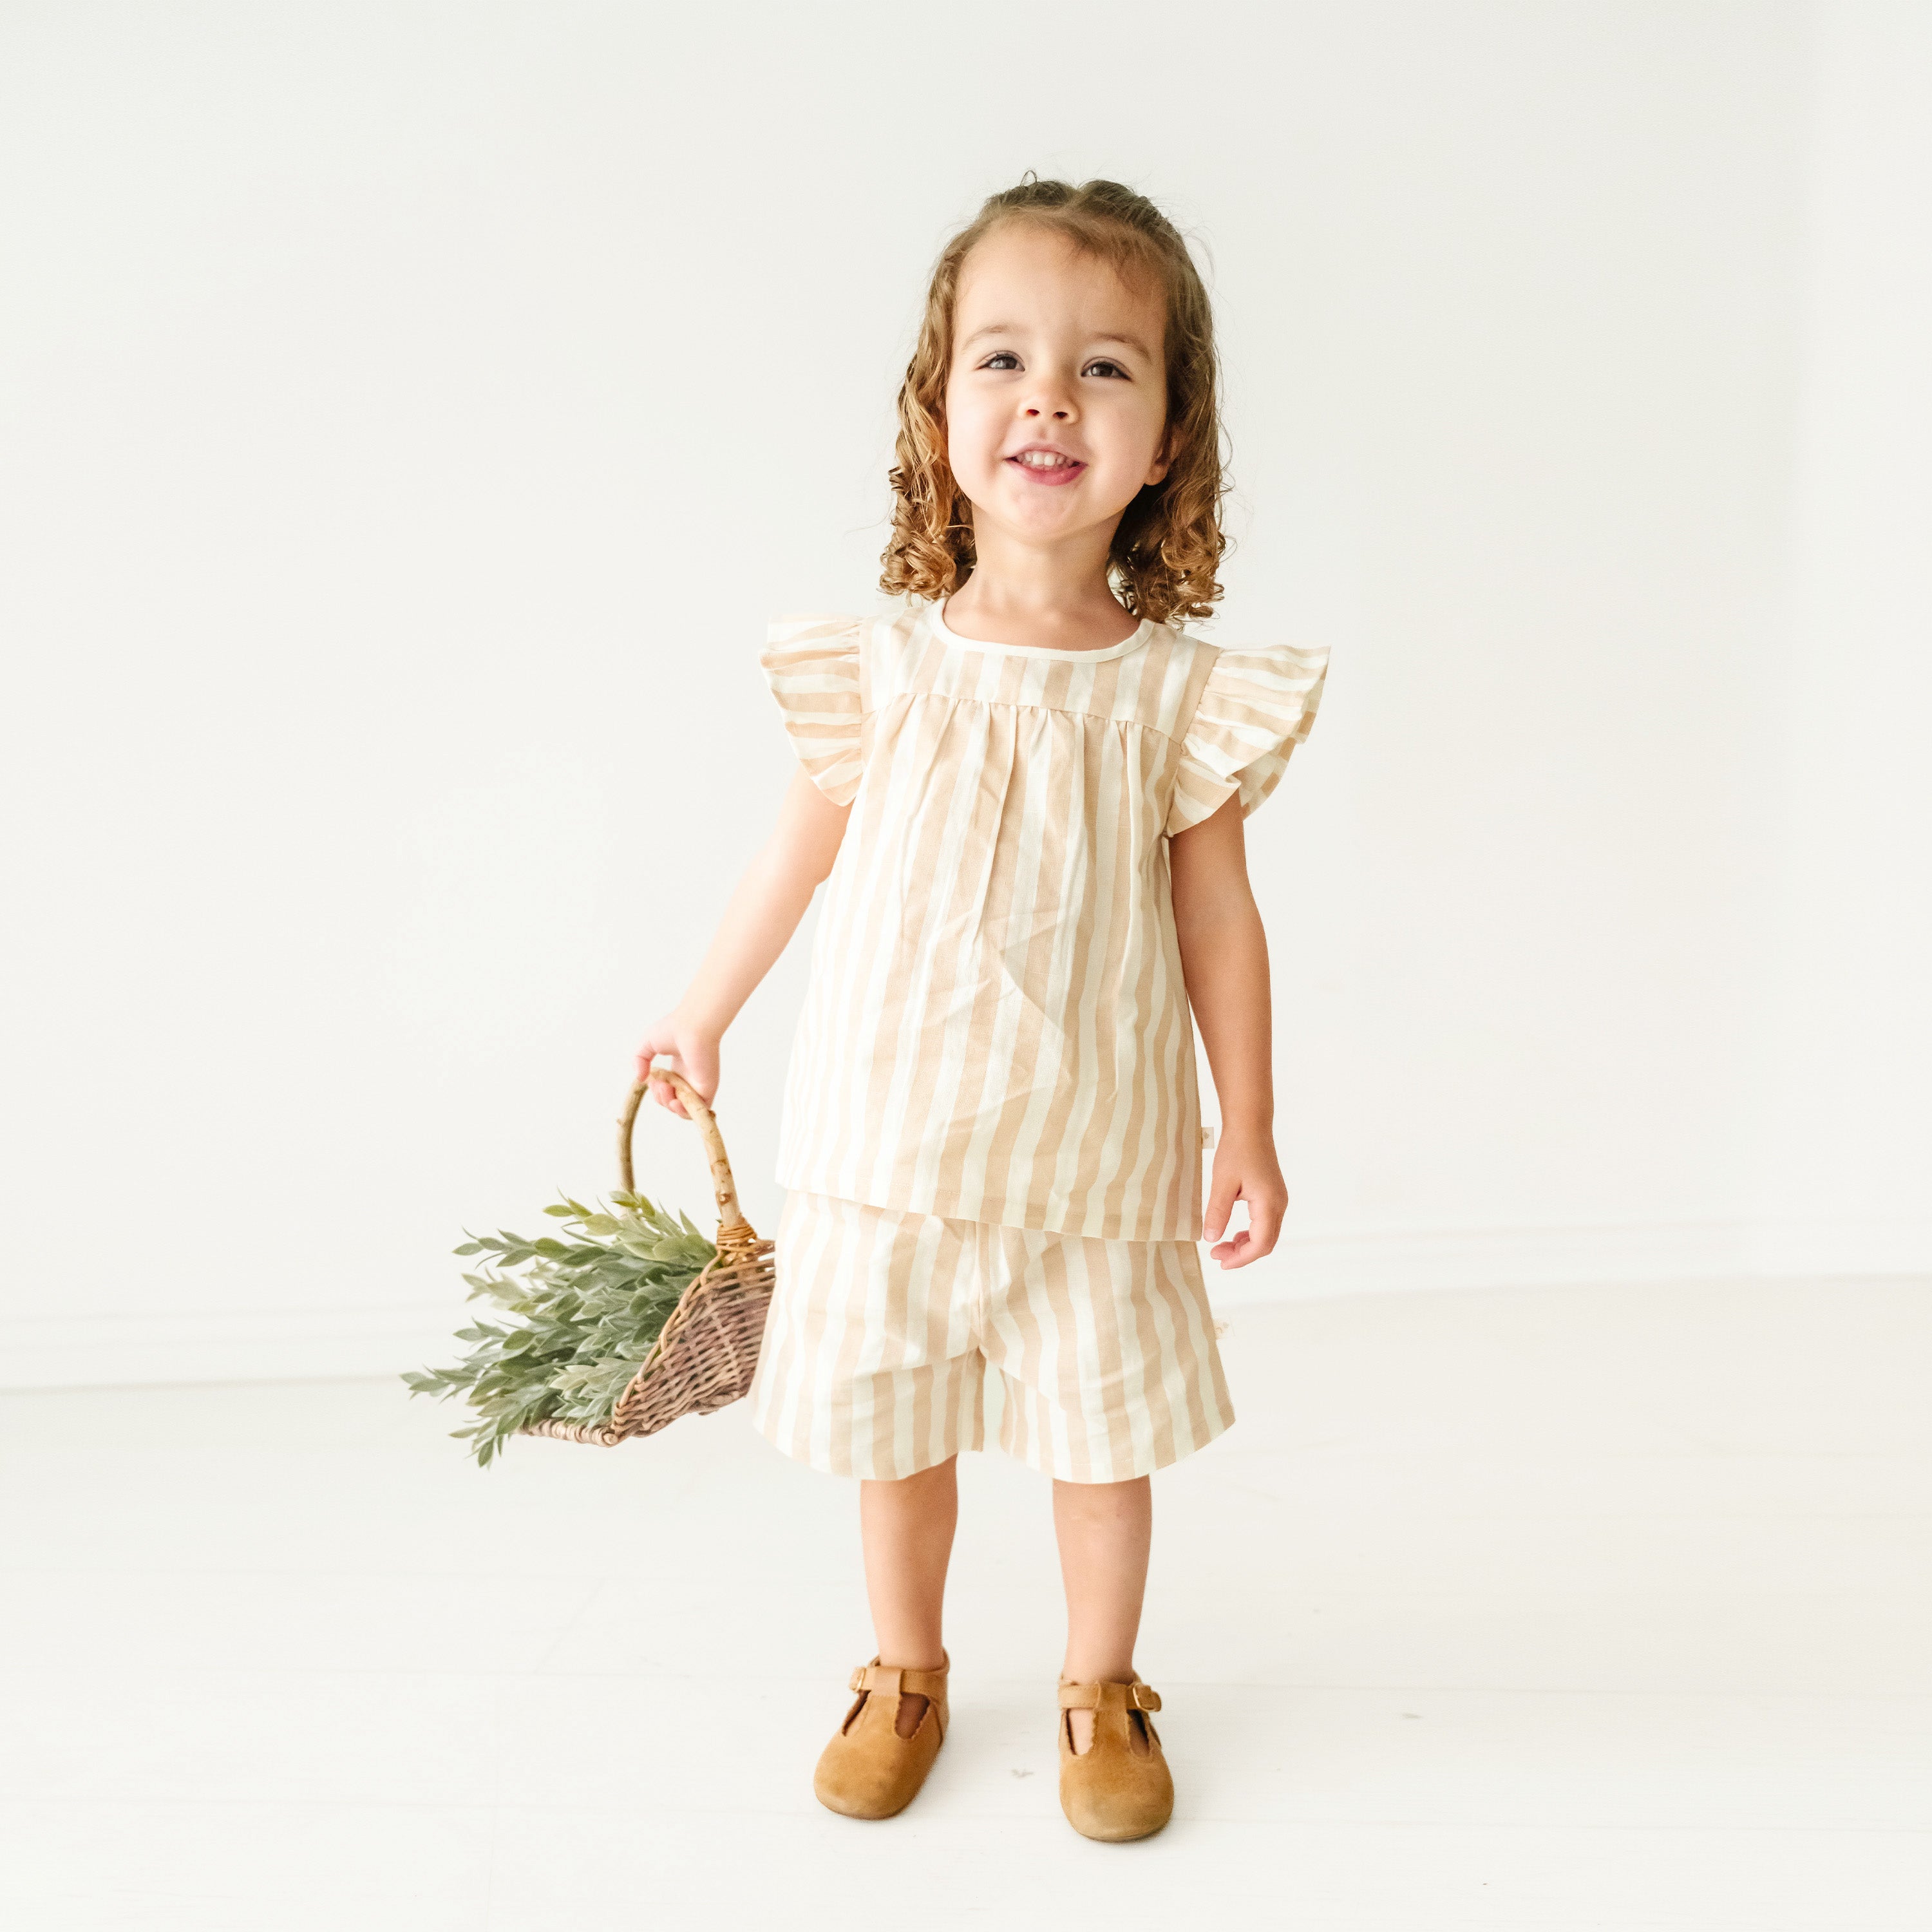 A young girl with curly hair, dressed in a Makemake Organics Organic Linen Flutter Top and Shorts - Beige Stripes, stands smiling and holding a wicker basket with greenery, on a plain white background.